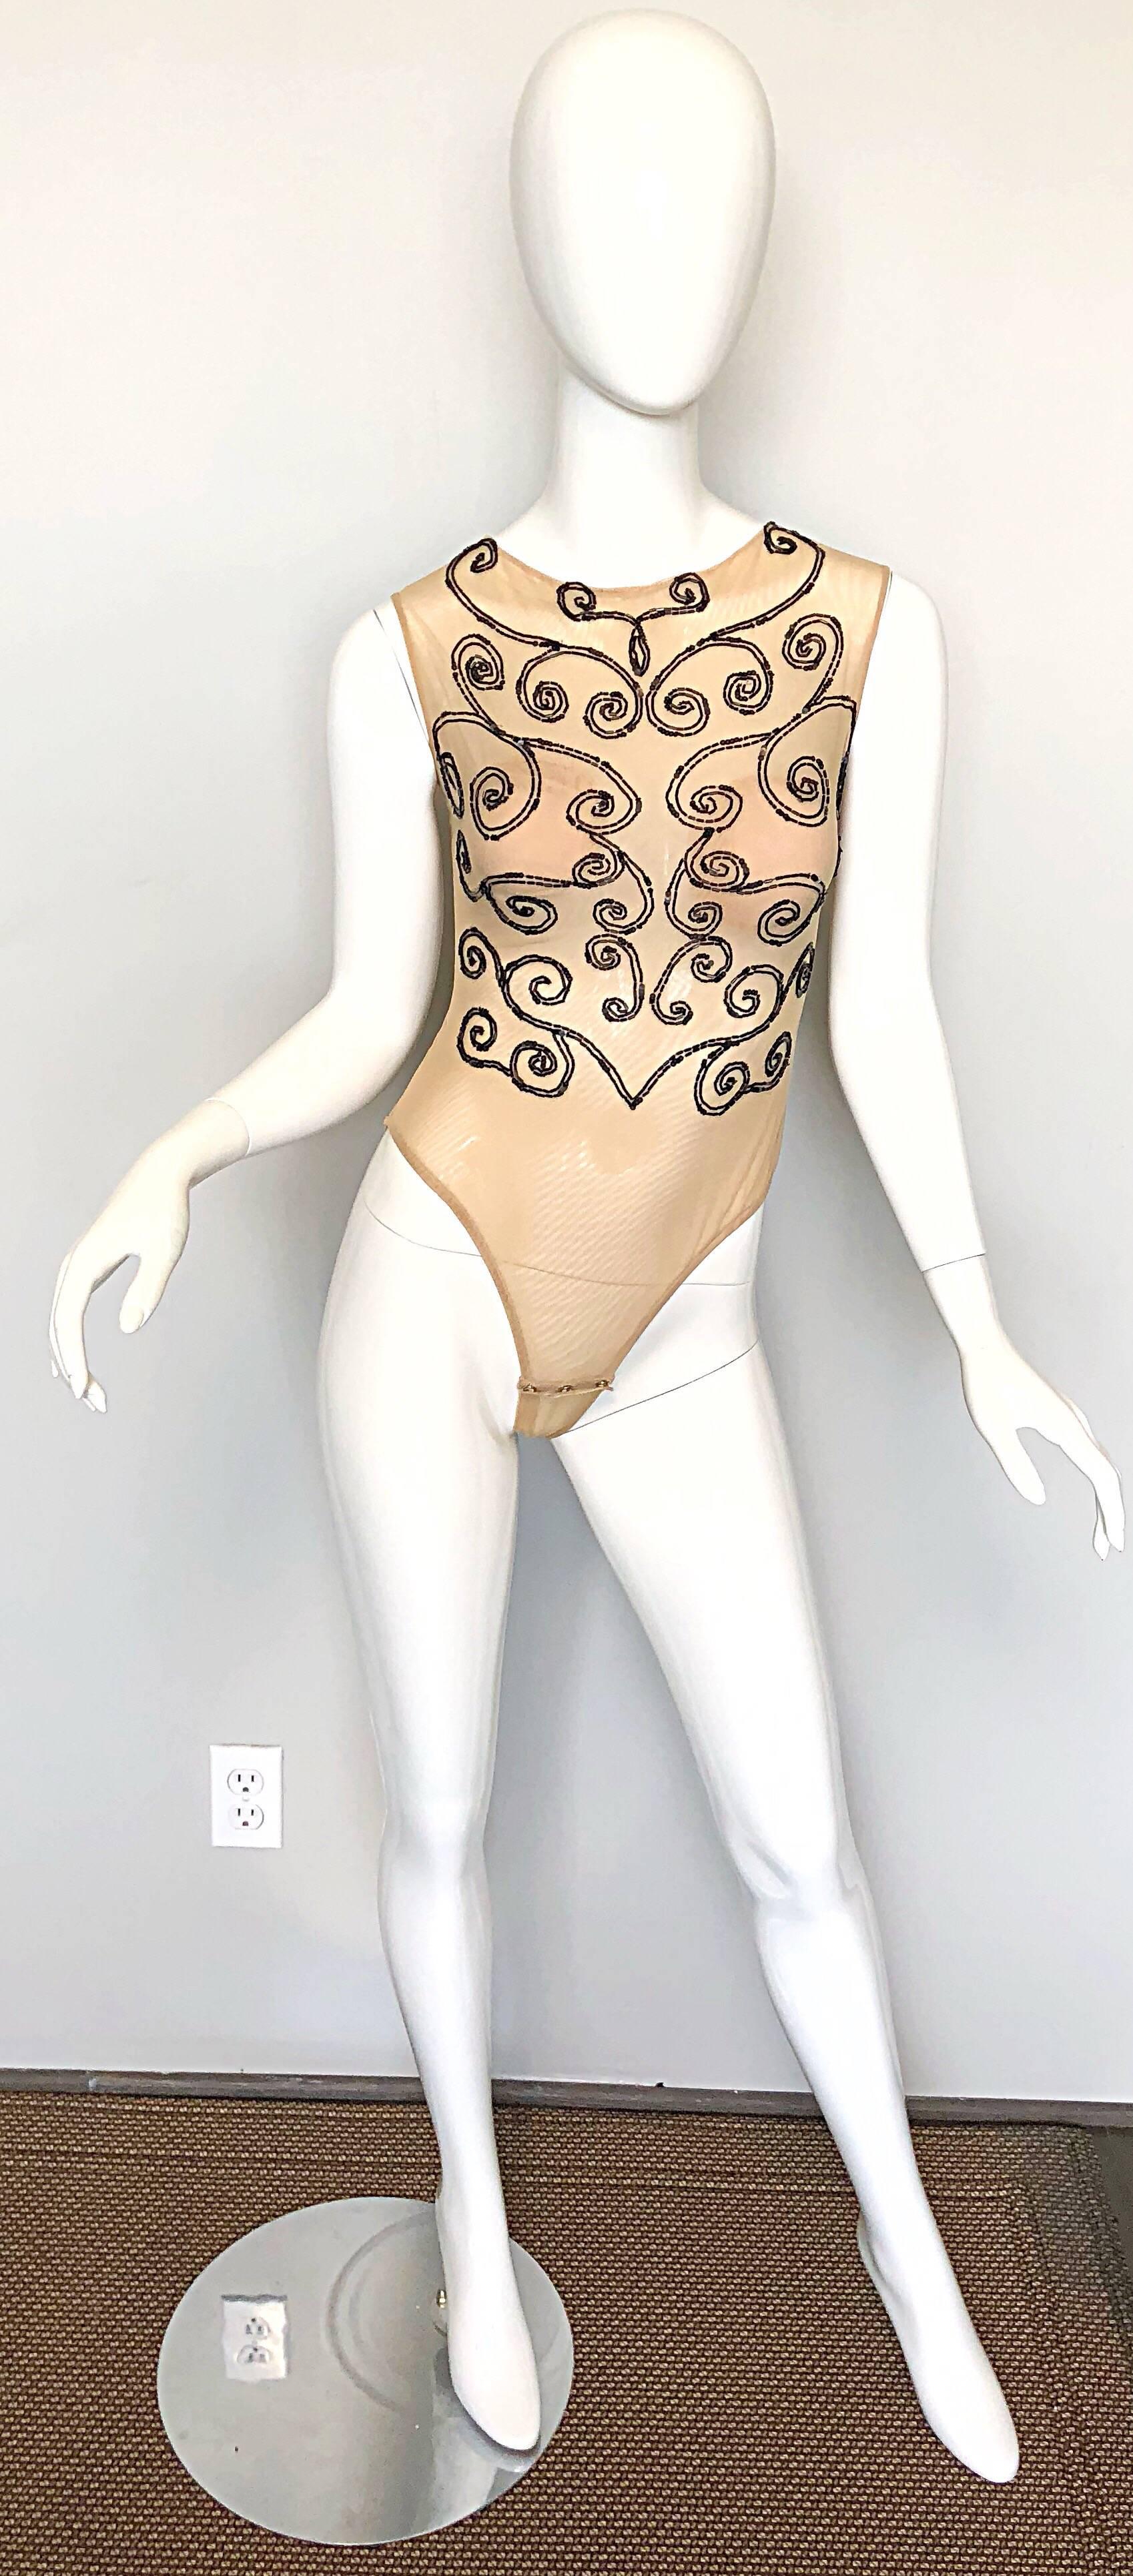 Sexy 1990s C.D GREENE Couture never worn nude and black beaded sheer bodysuit! Features a double layered nude mesh with thousands of hand-sewn black seed beads throughout the front. Hidden zipper up the back with hook-and-eye closure. Built-in nude